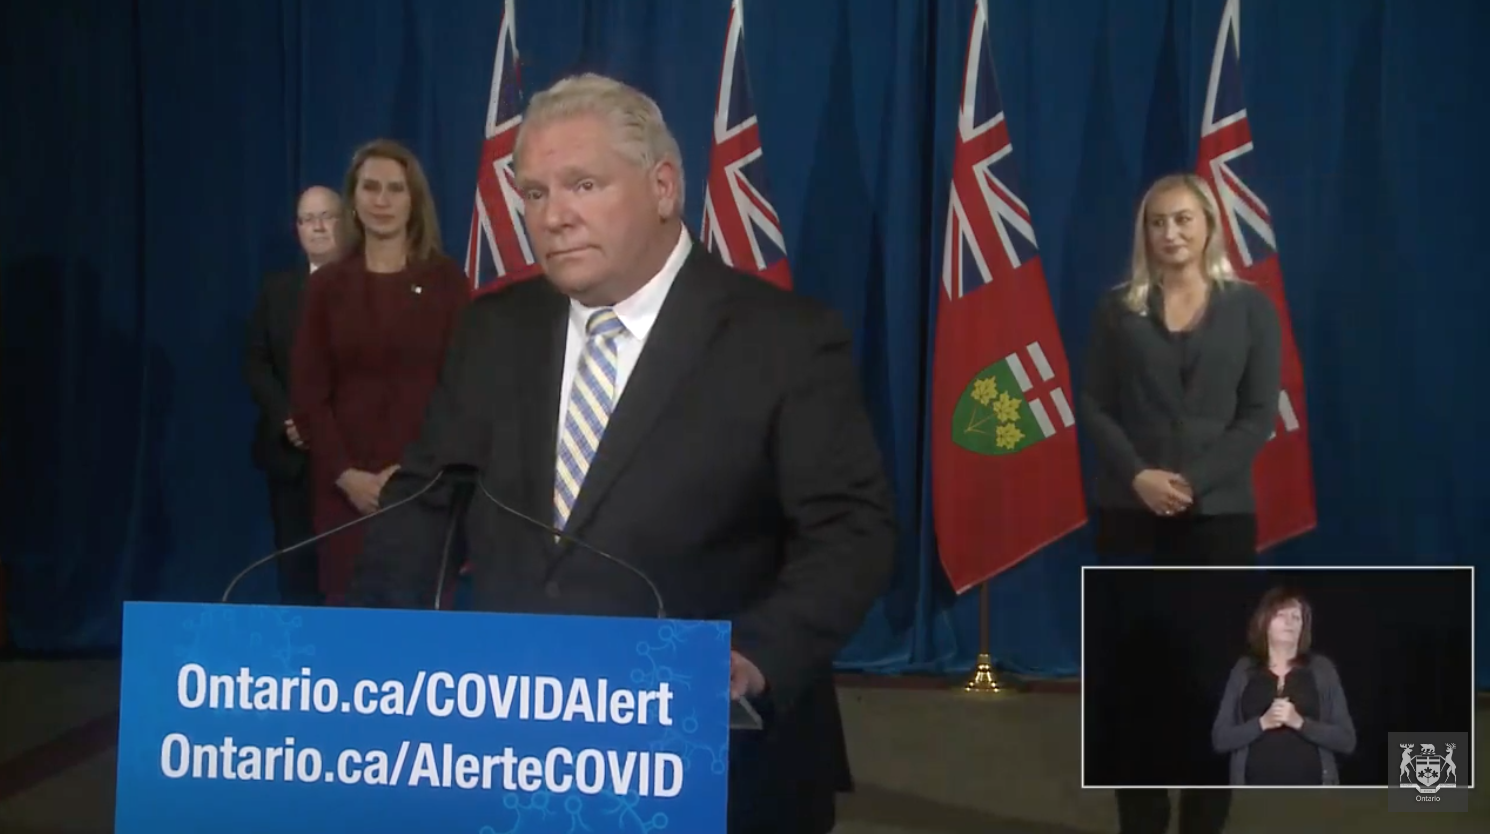 'I’ve just had it with these insurance companies': Your Ontario COVID-19 roundup